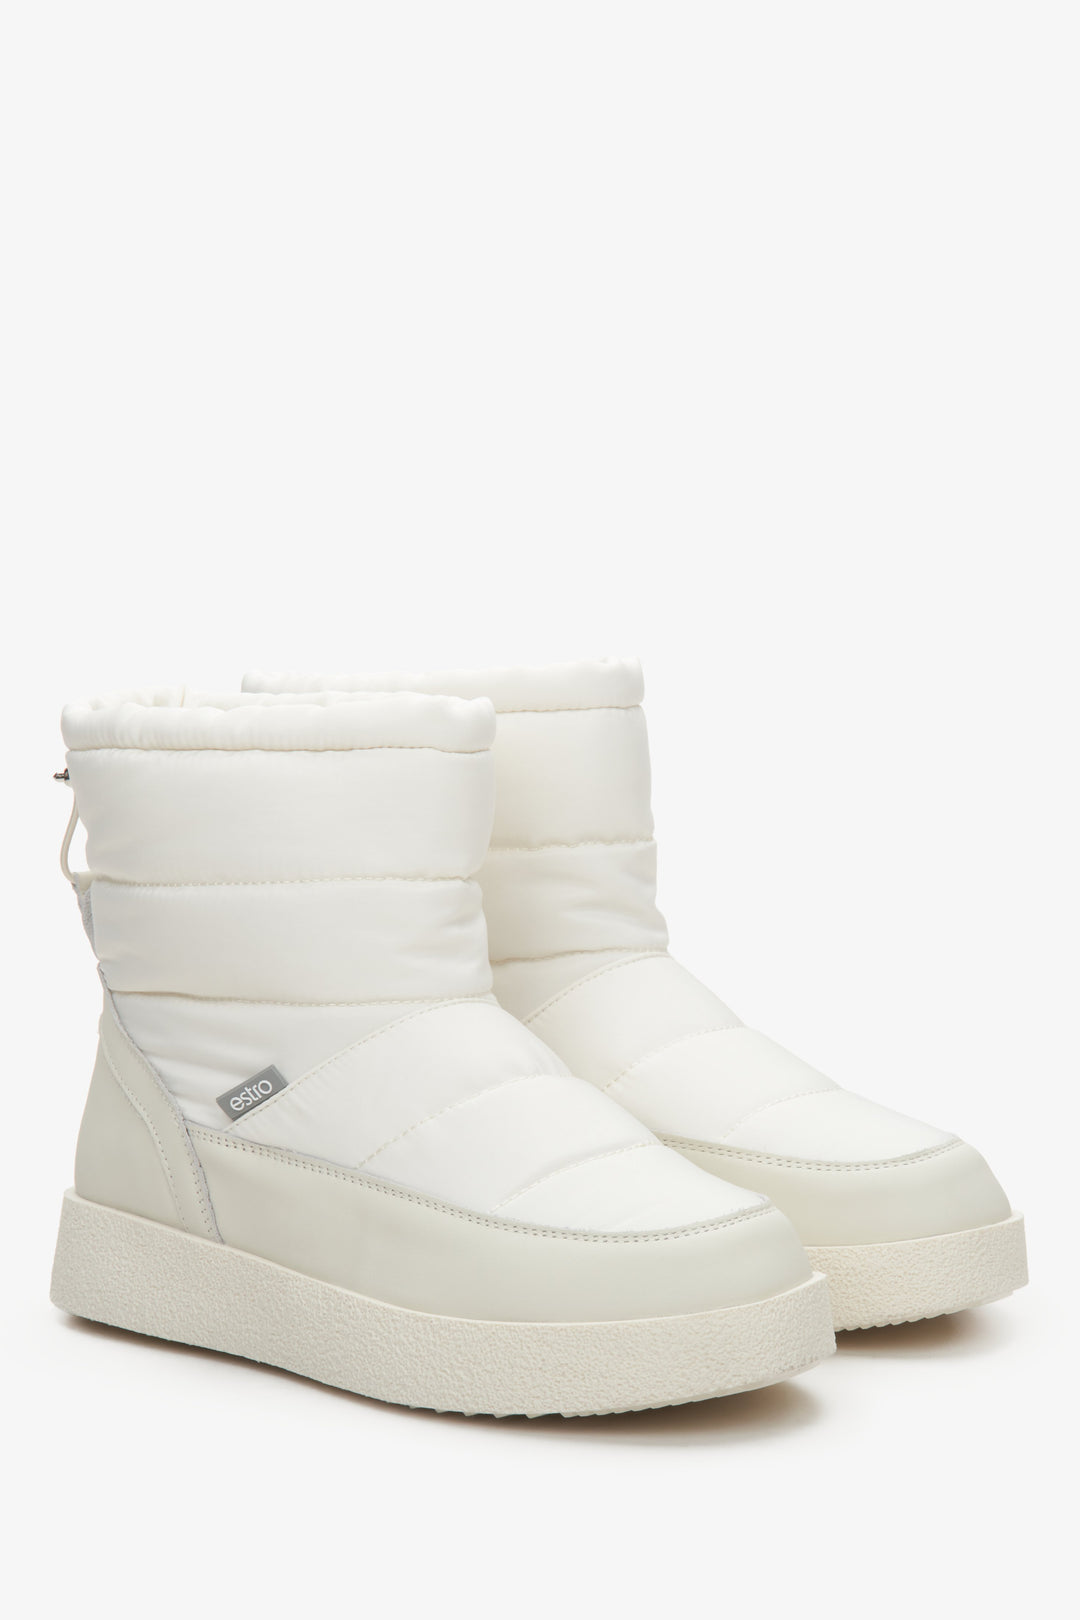 Women's leather snow boots in light beige with fur lining by Estro.